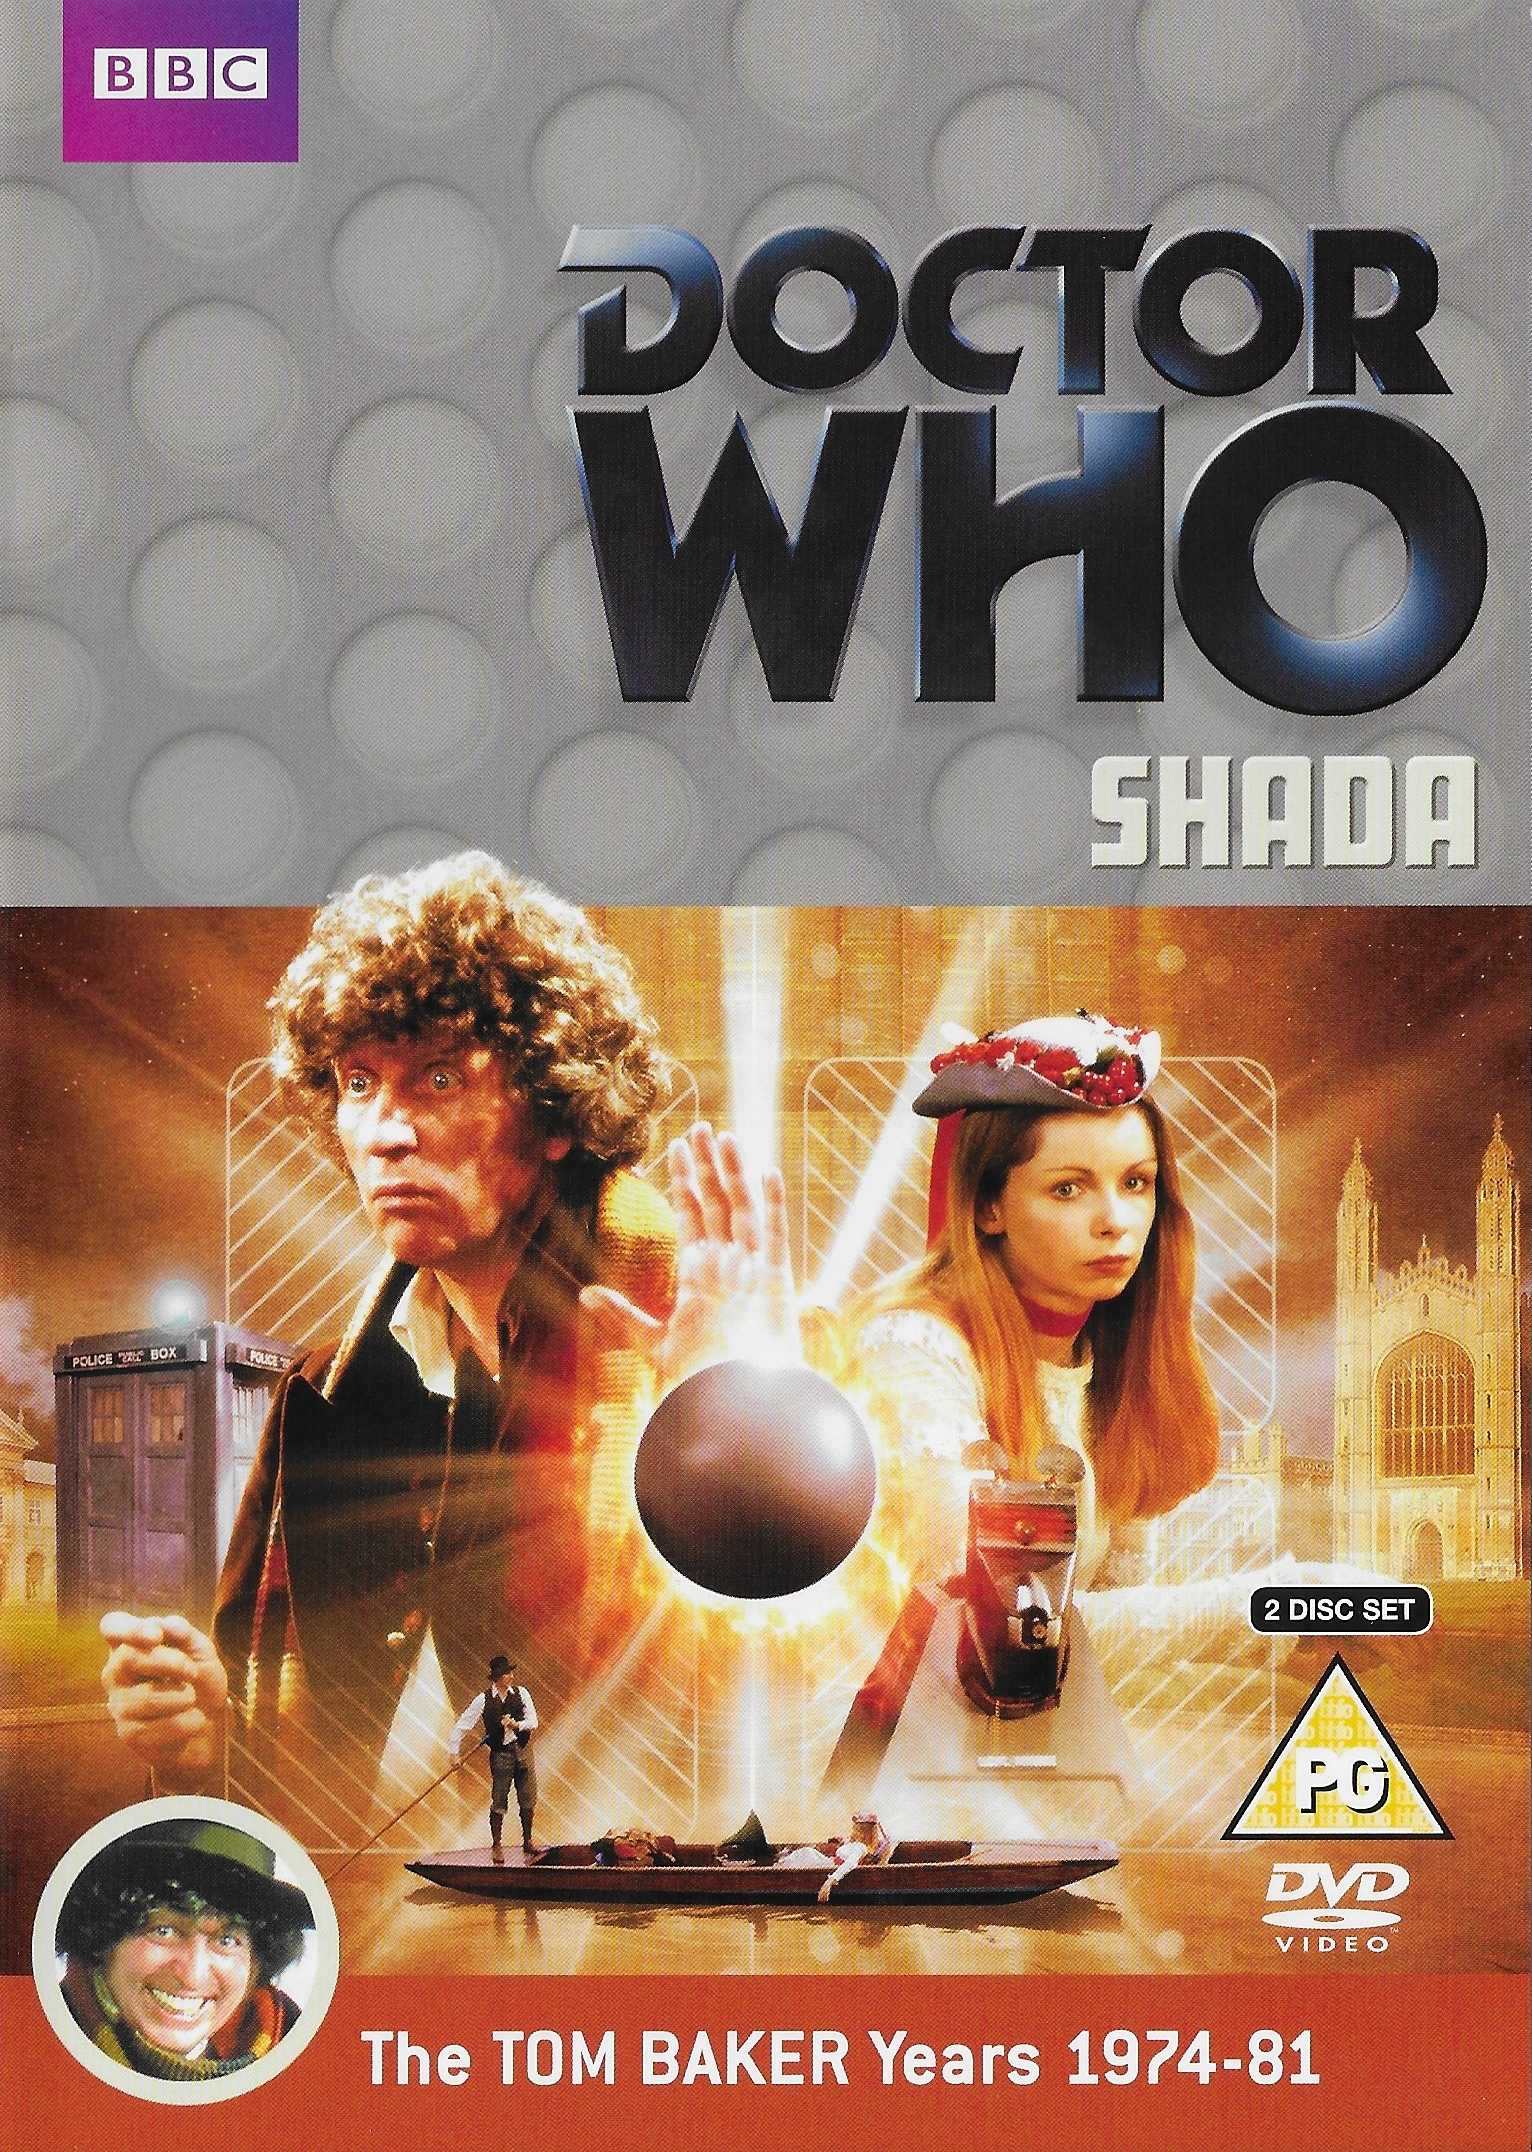 Picture of BBCDVD 3388A Doctor Who - Shada by artist Douglas Adams from the BBC records and Tapes library